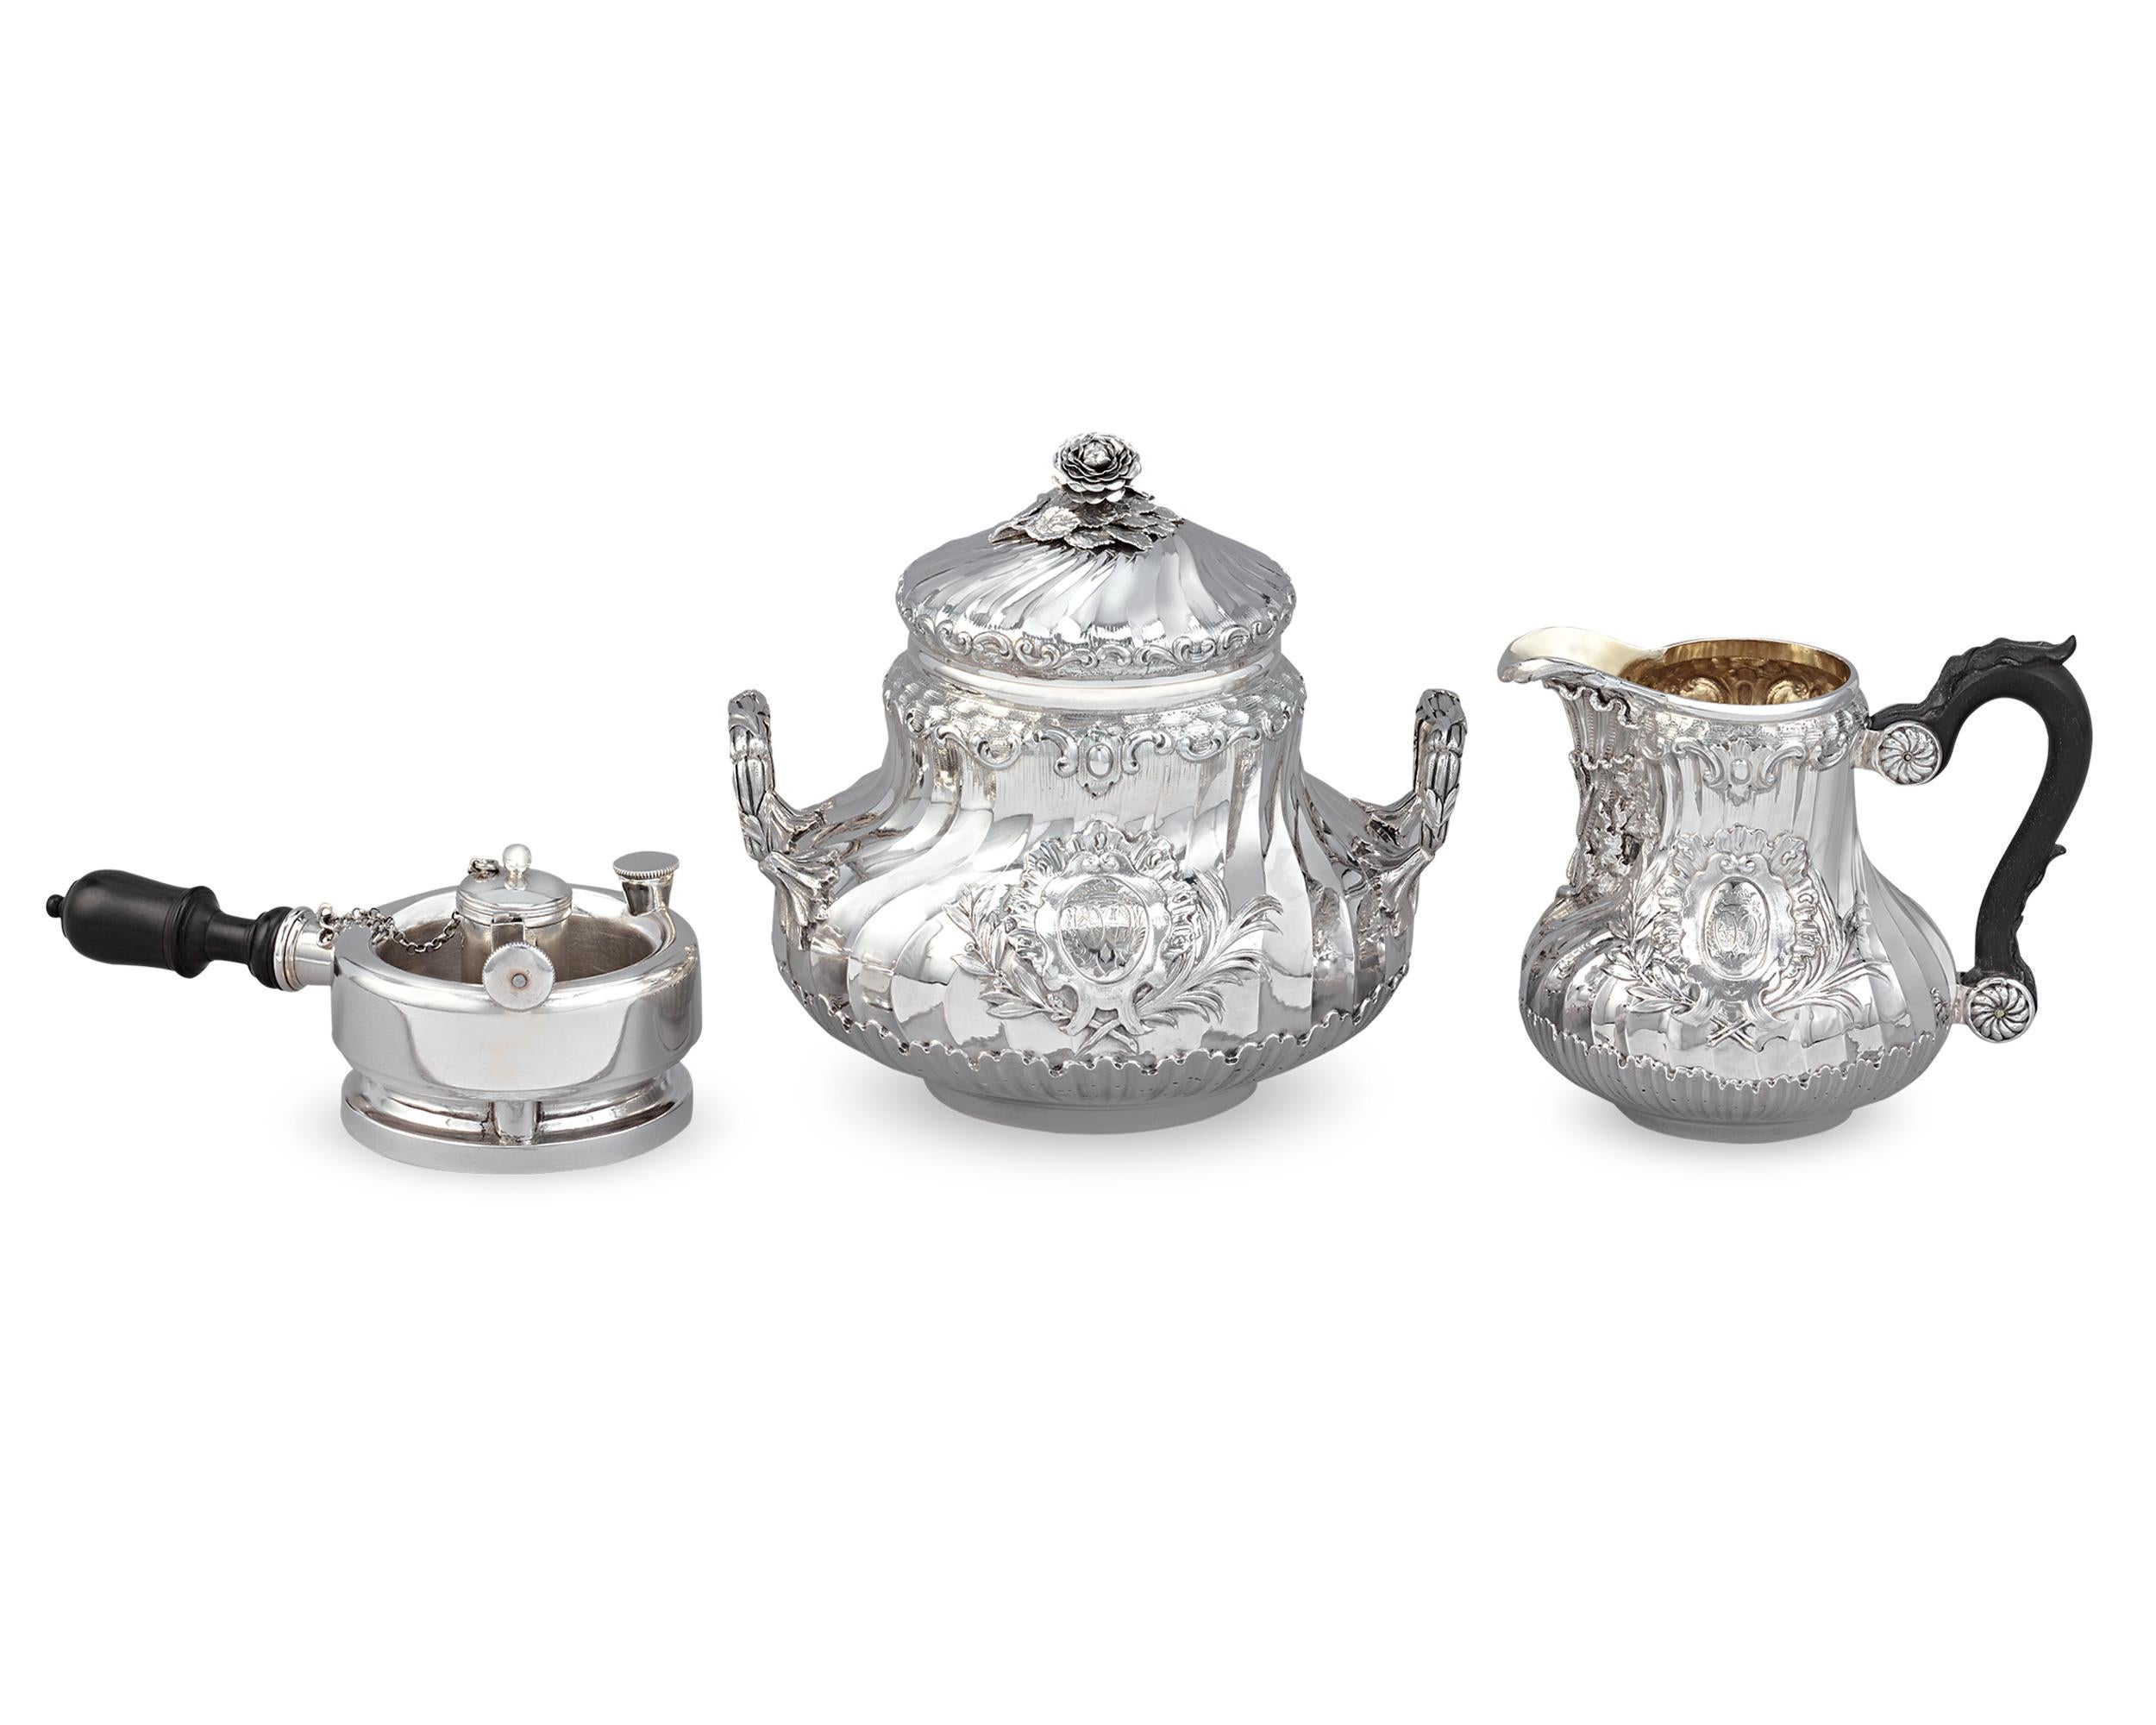 19th Century Silver Coffee and Tea Service by Boin-Taburet Paris